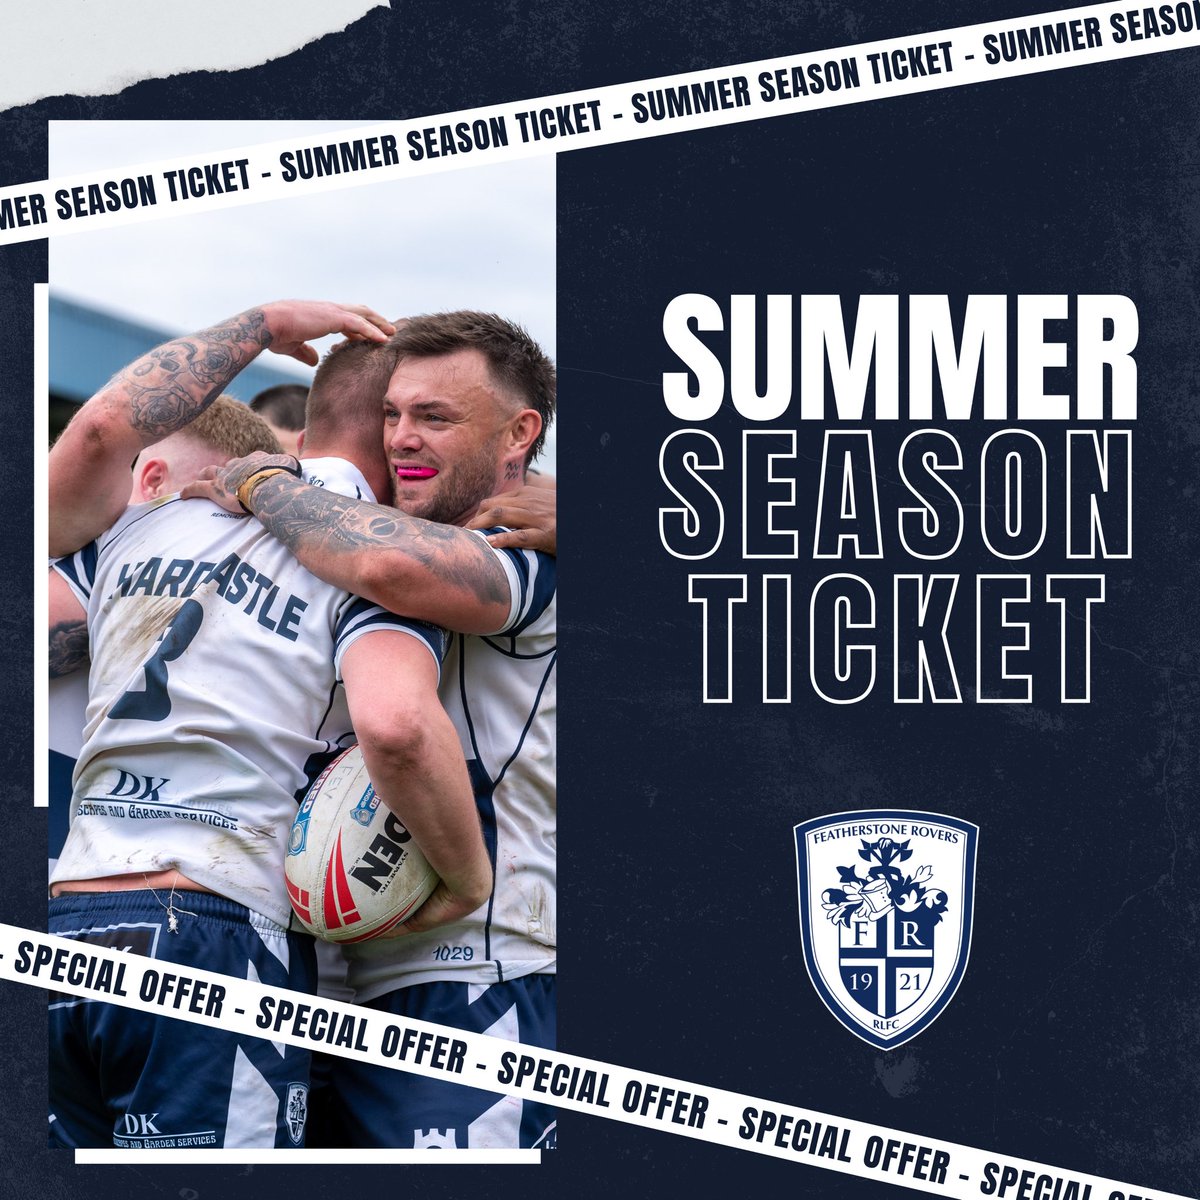 Featherstone Rovers have introduced a Summer Season Ticket for the remaining nine home games at the Millennium Stadium! ☀️🙌🎟️ Adults 18-64 years - £160 Concessions 65+ - £135 Children 2-17 years - £35 Read all about it: featherstonerovers.co.uk/news/rovers-la… #BlueWall